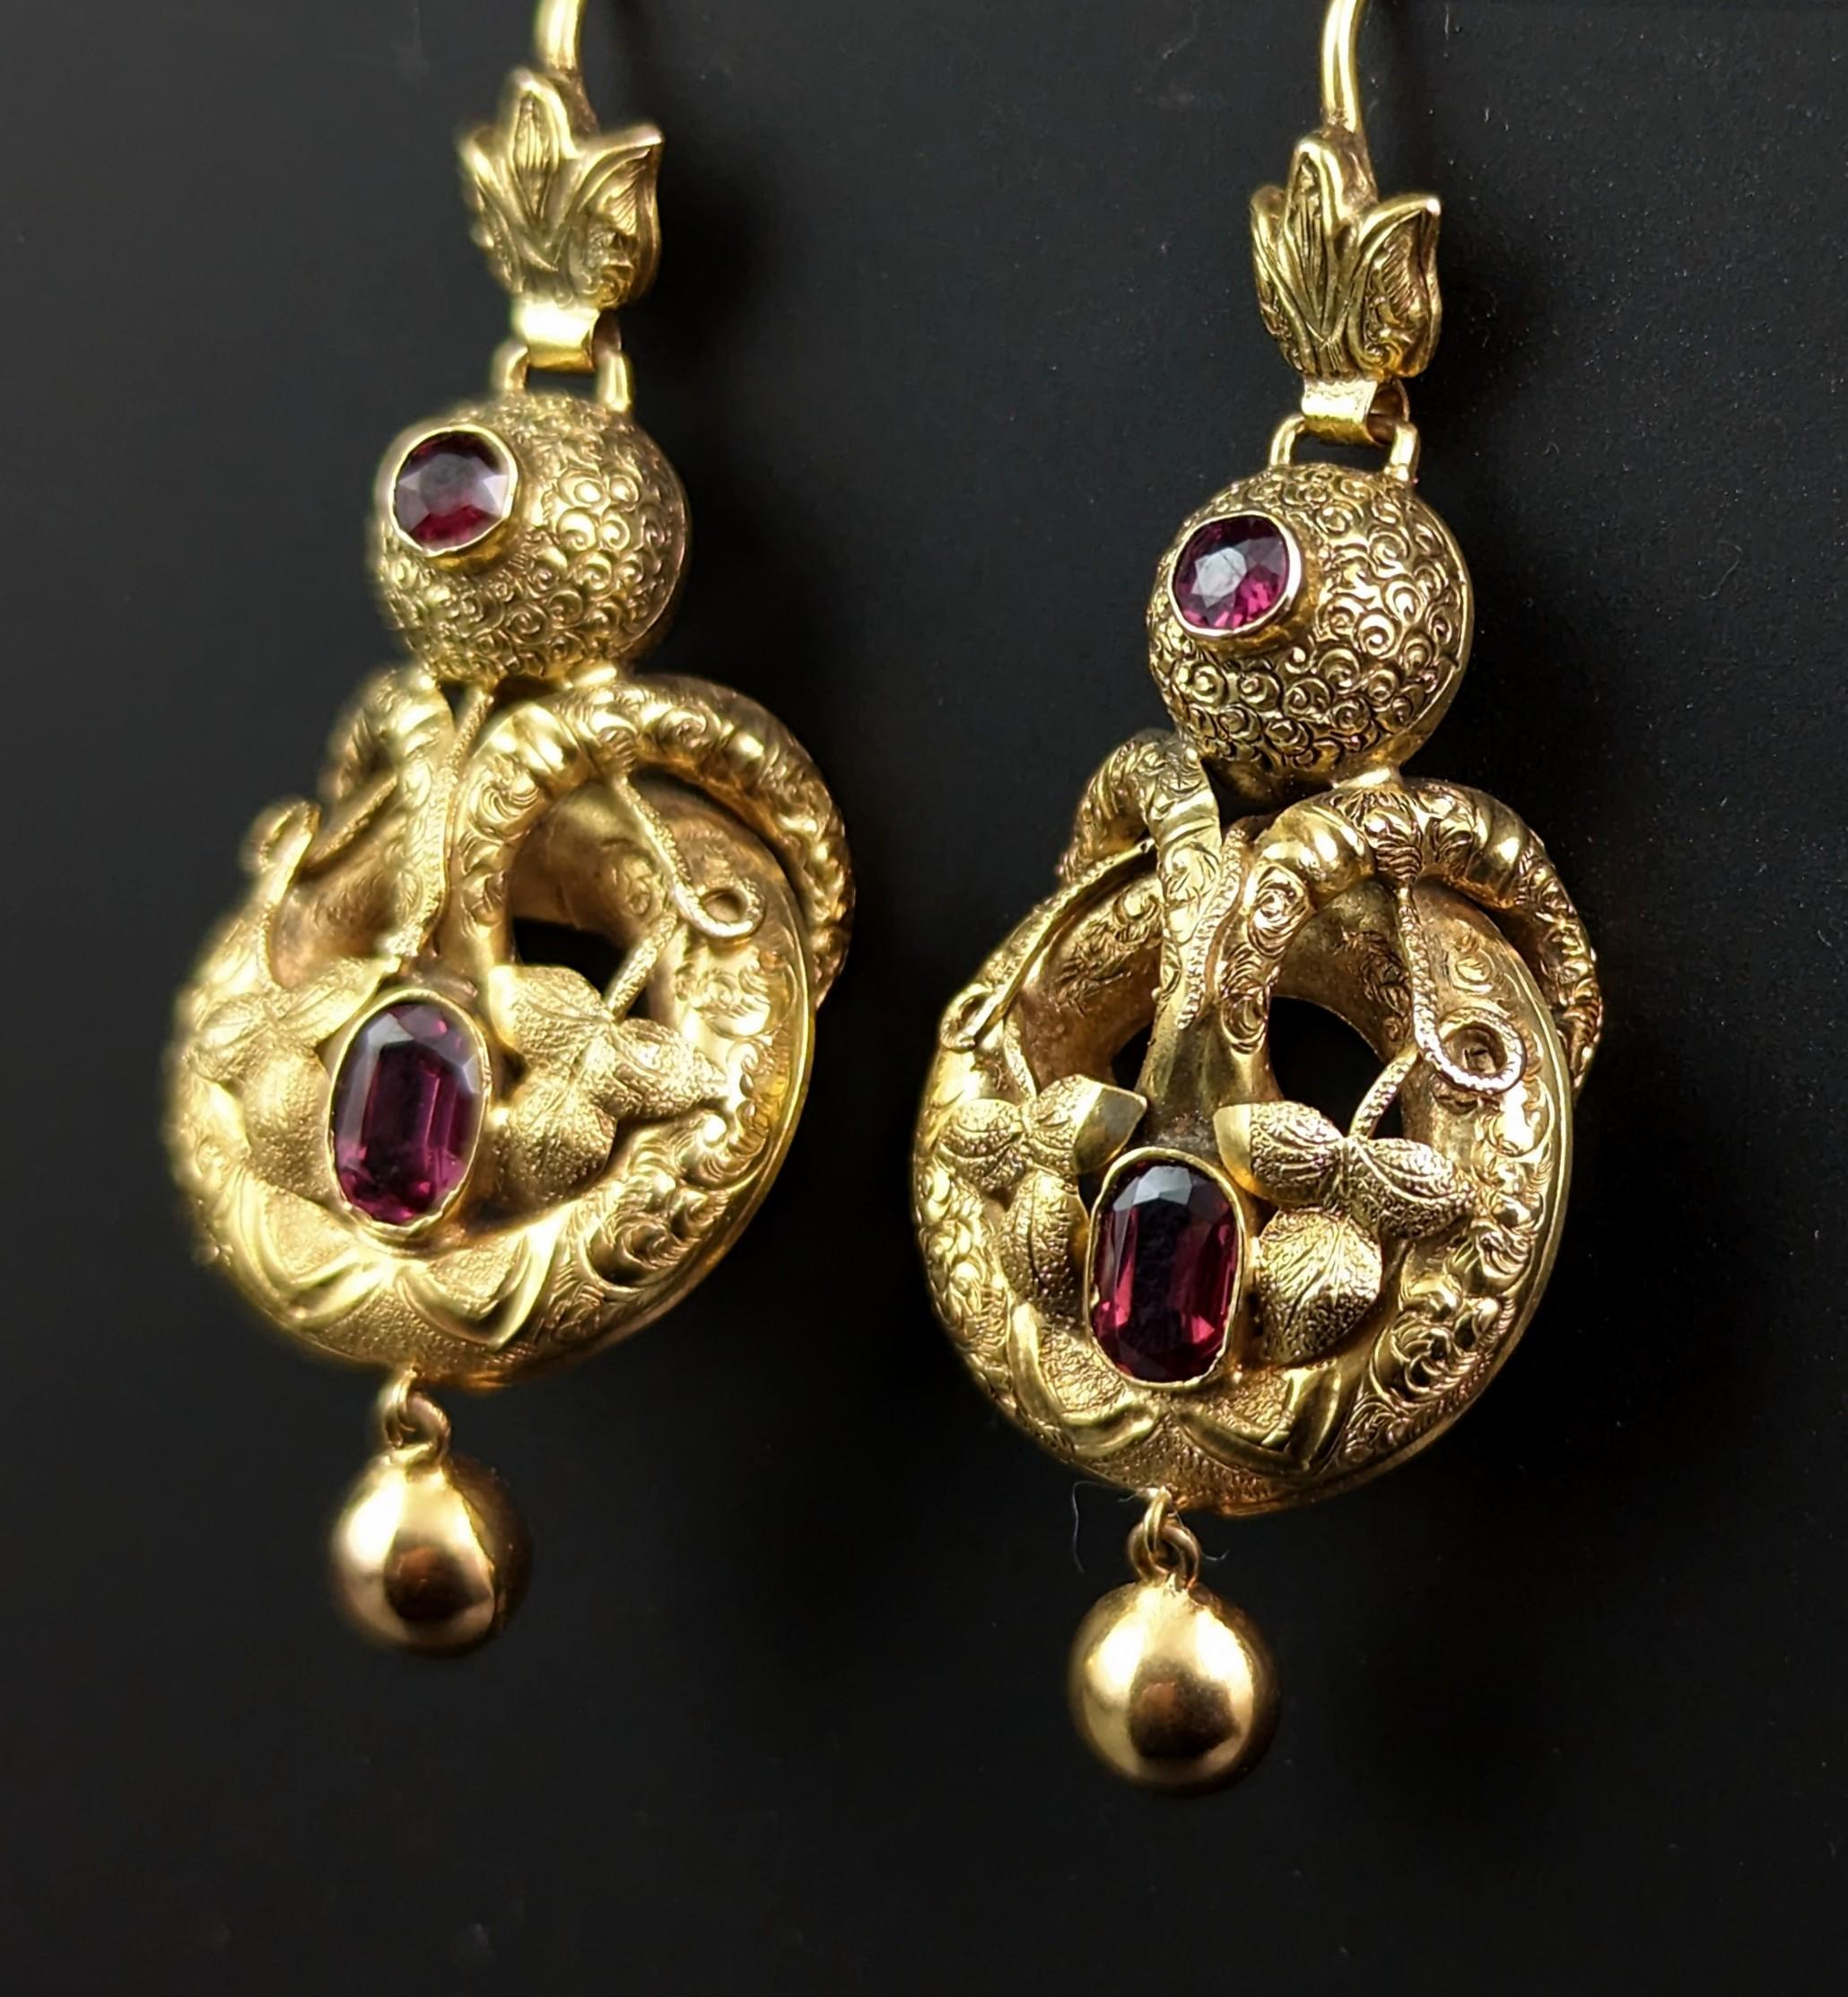 Antique Victorian Garnet Drop Earrings, 18 Carat Gold, Leaves and Vine For Sale 3